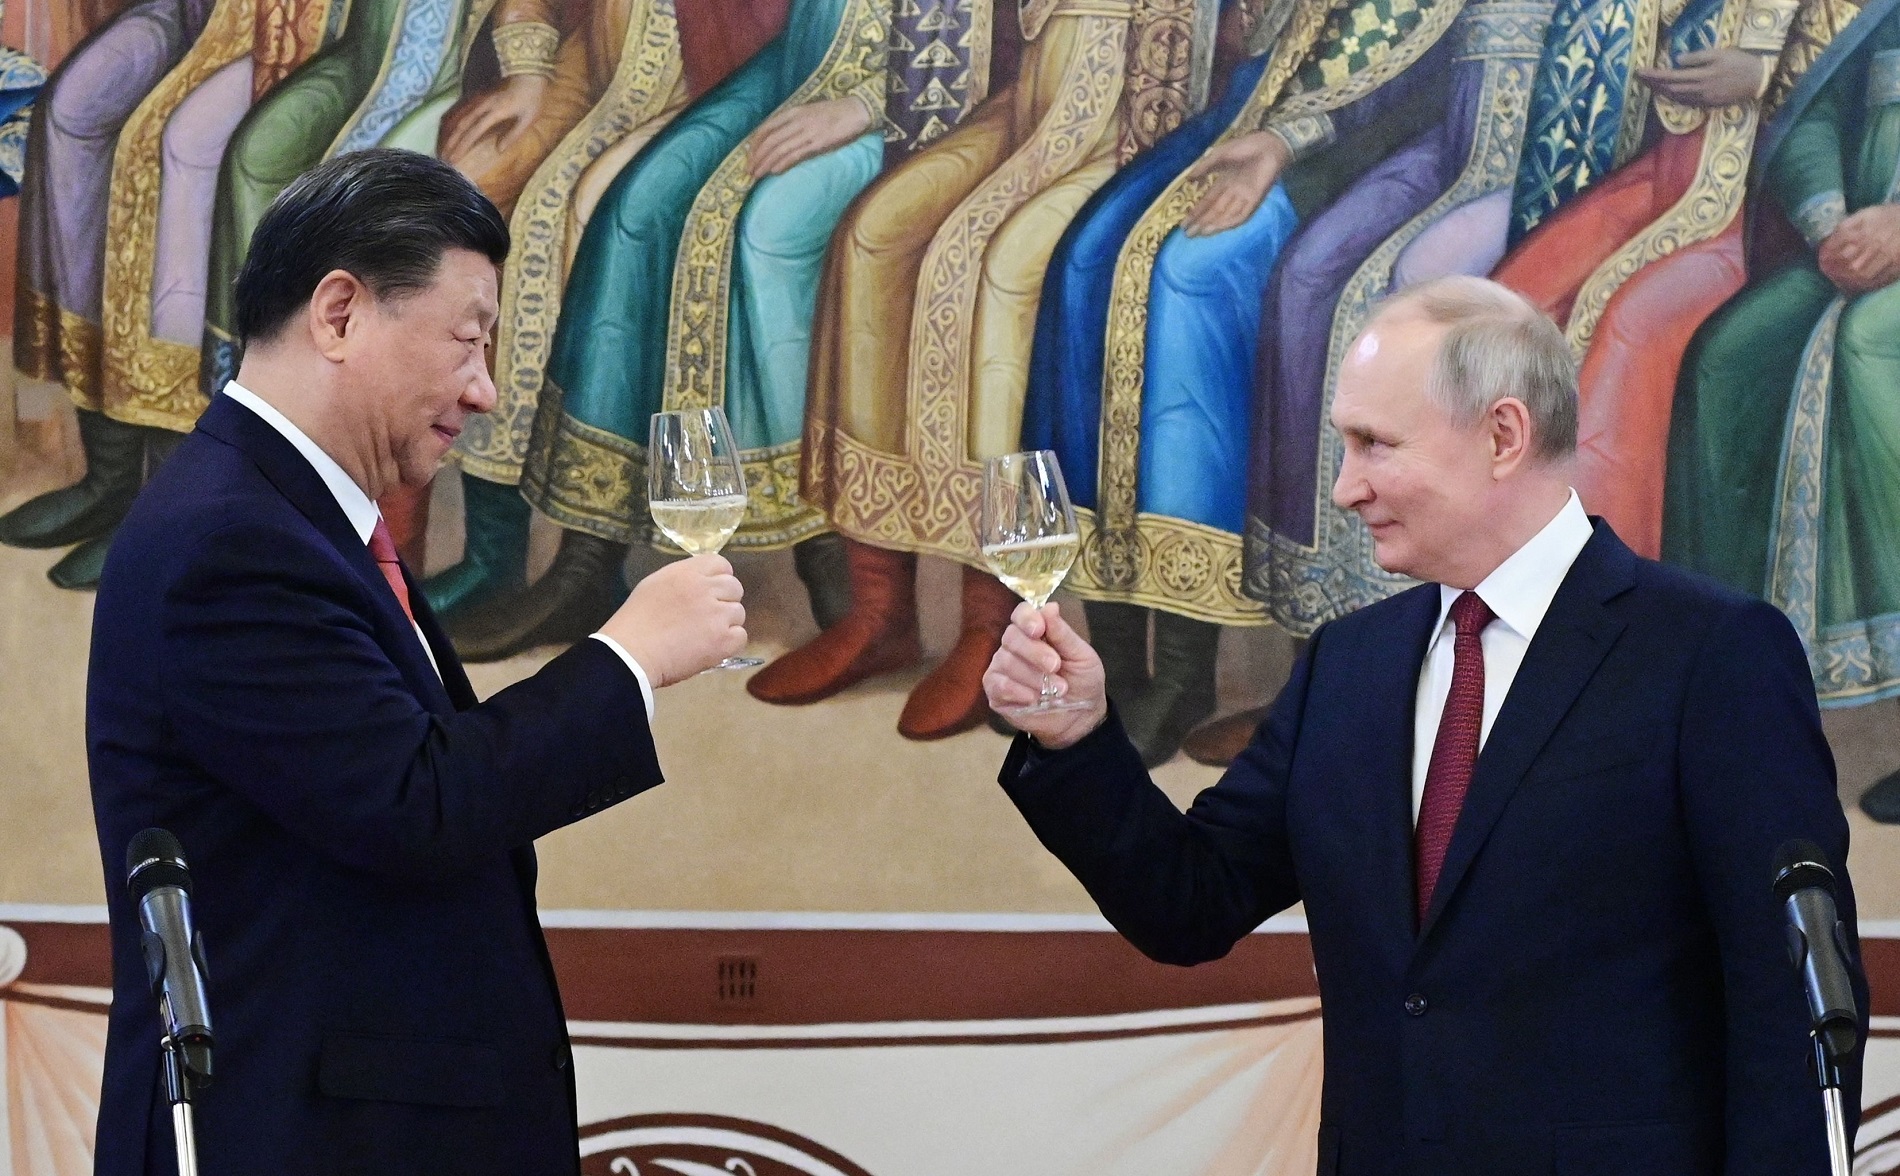 xi jinping will visit moscow